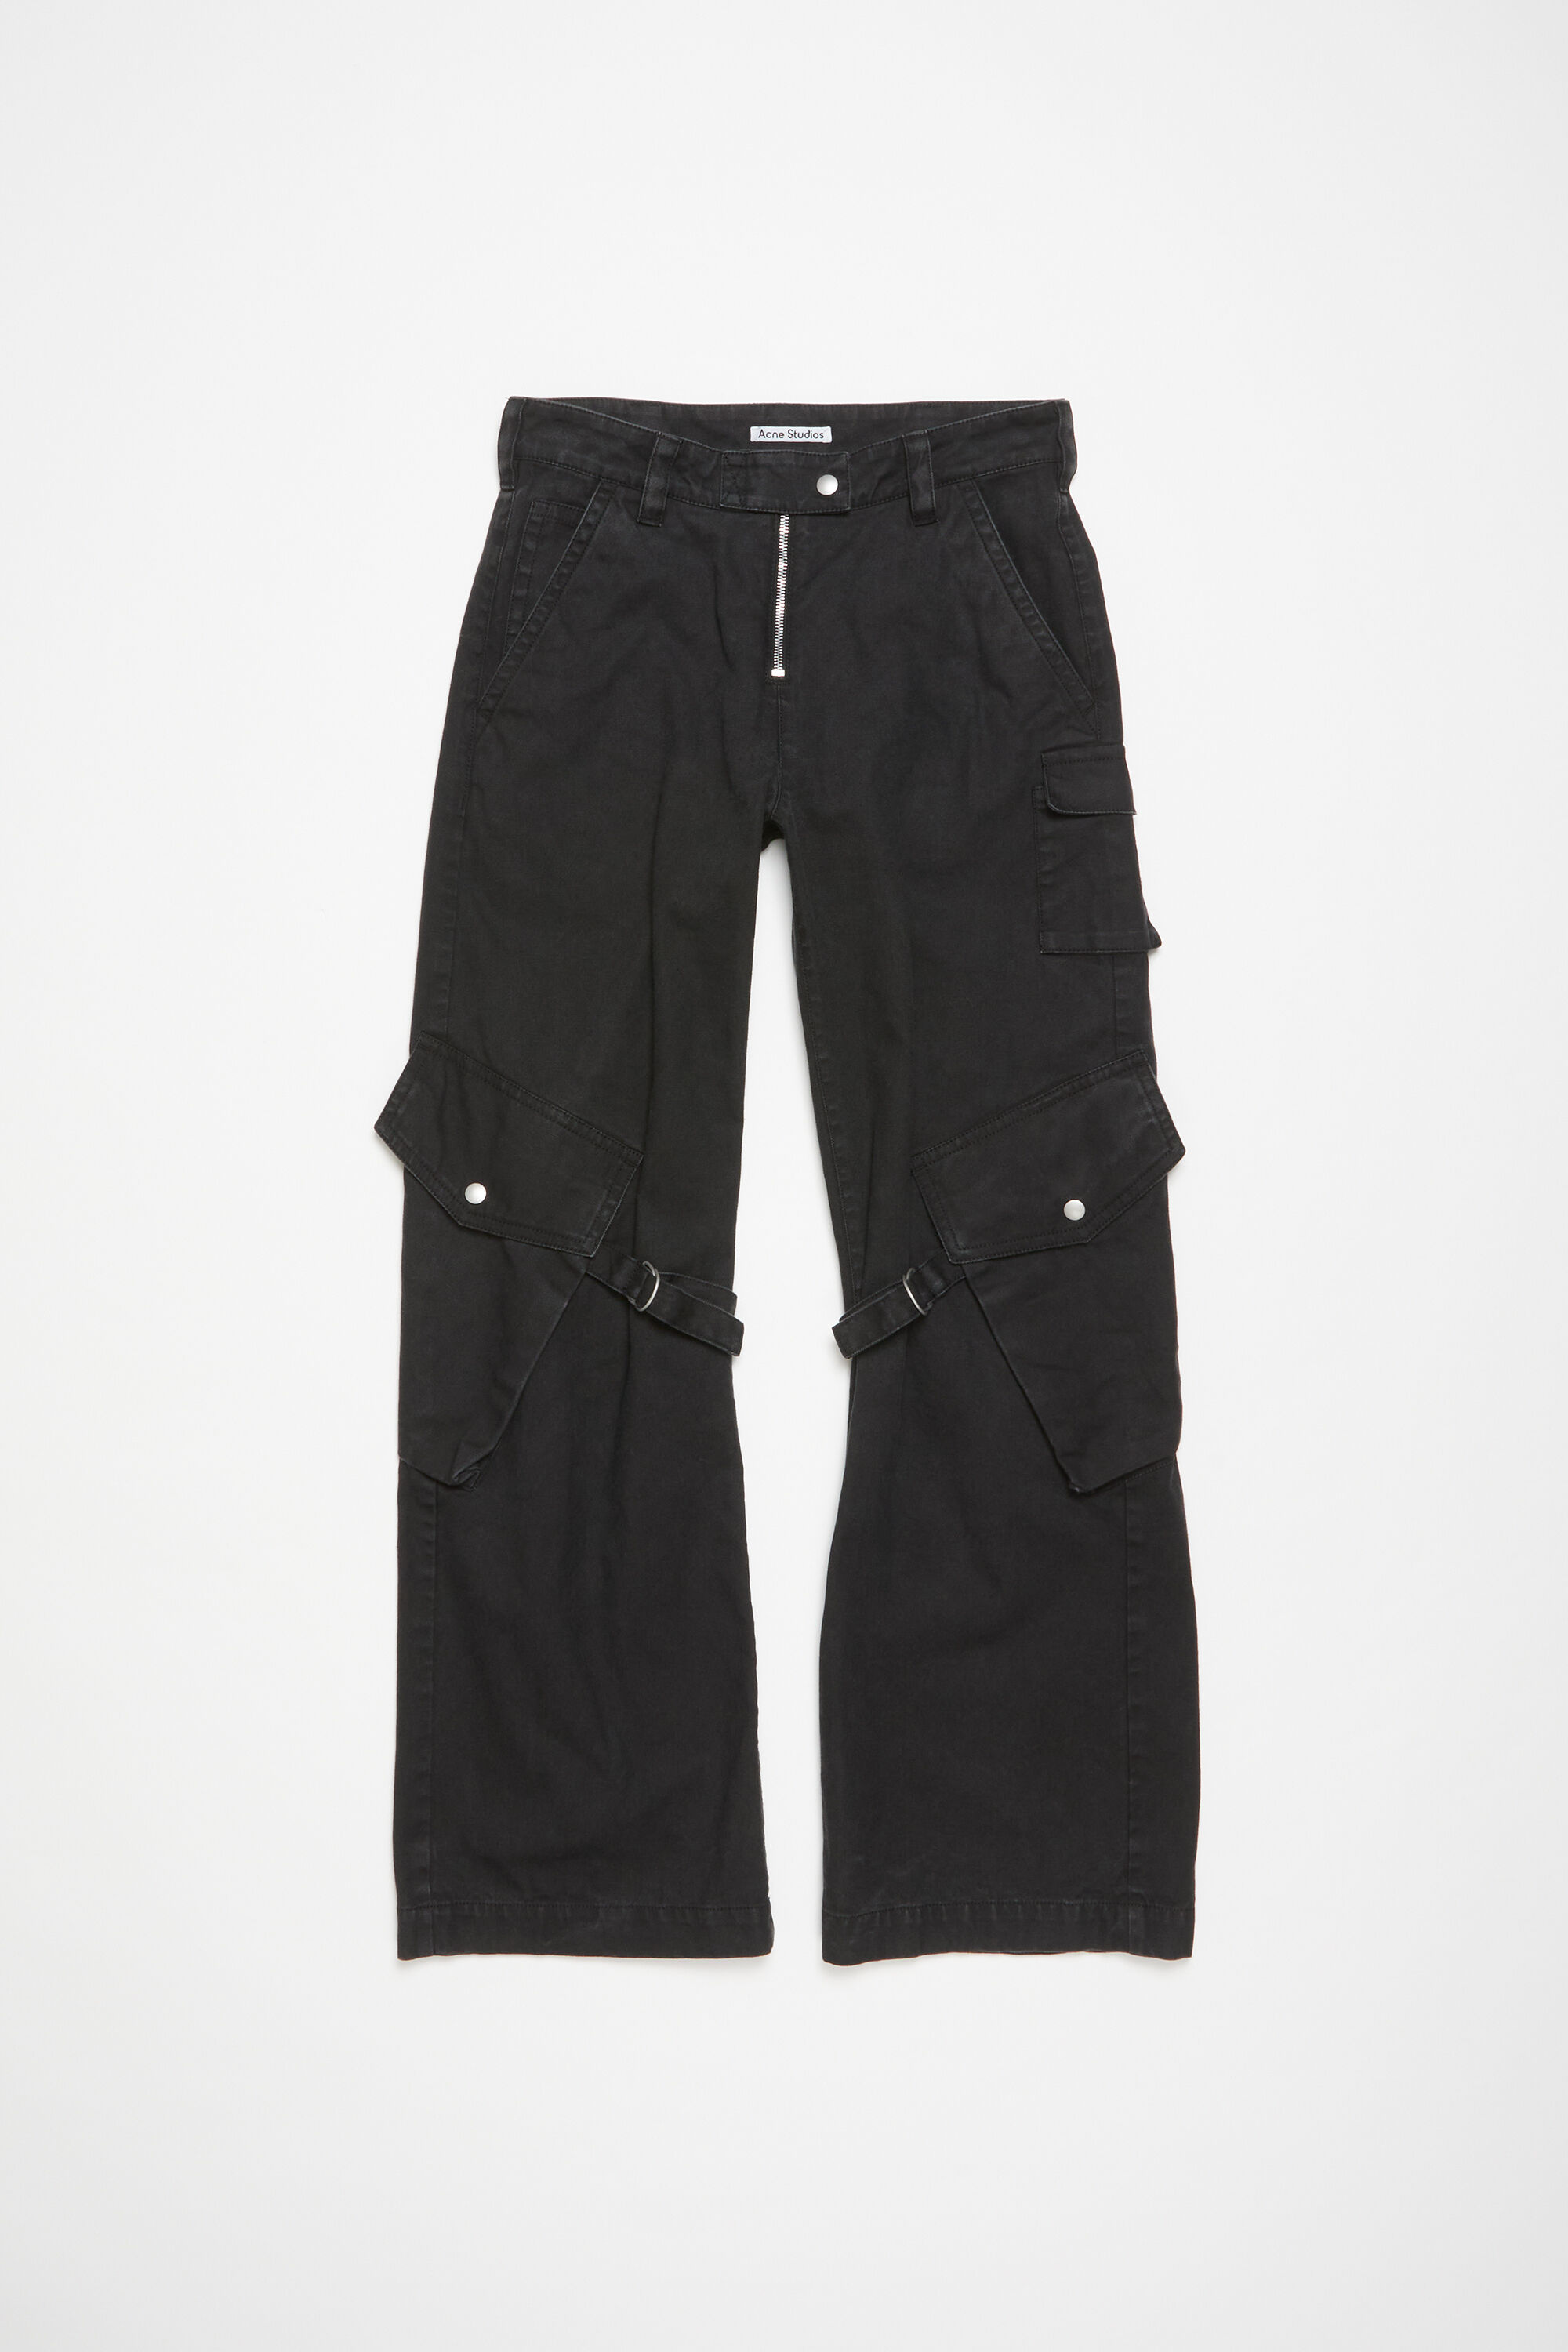 Acne Studios - Cargo trousers - Charcoal Grey